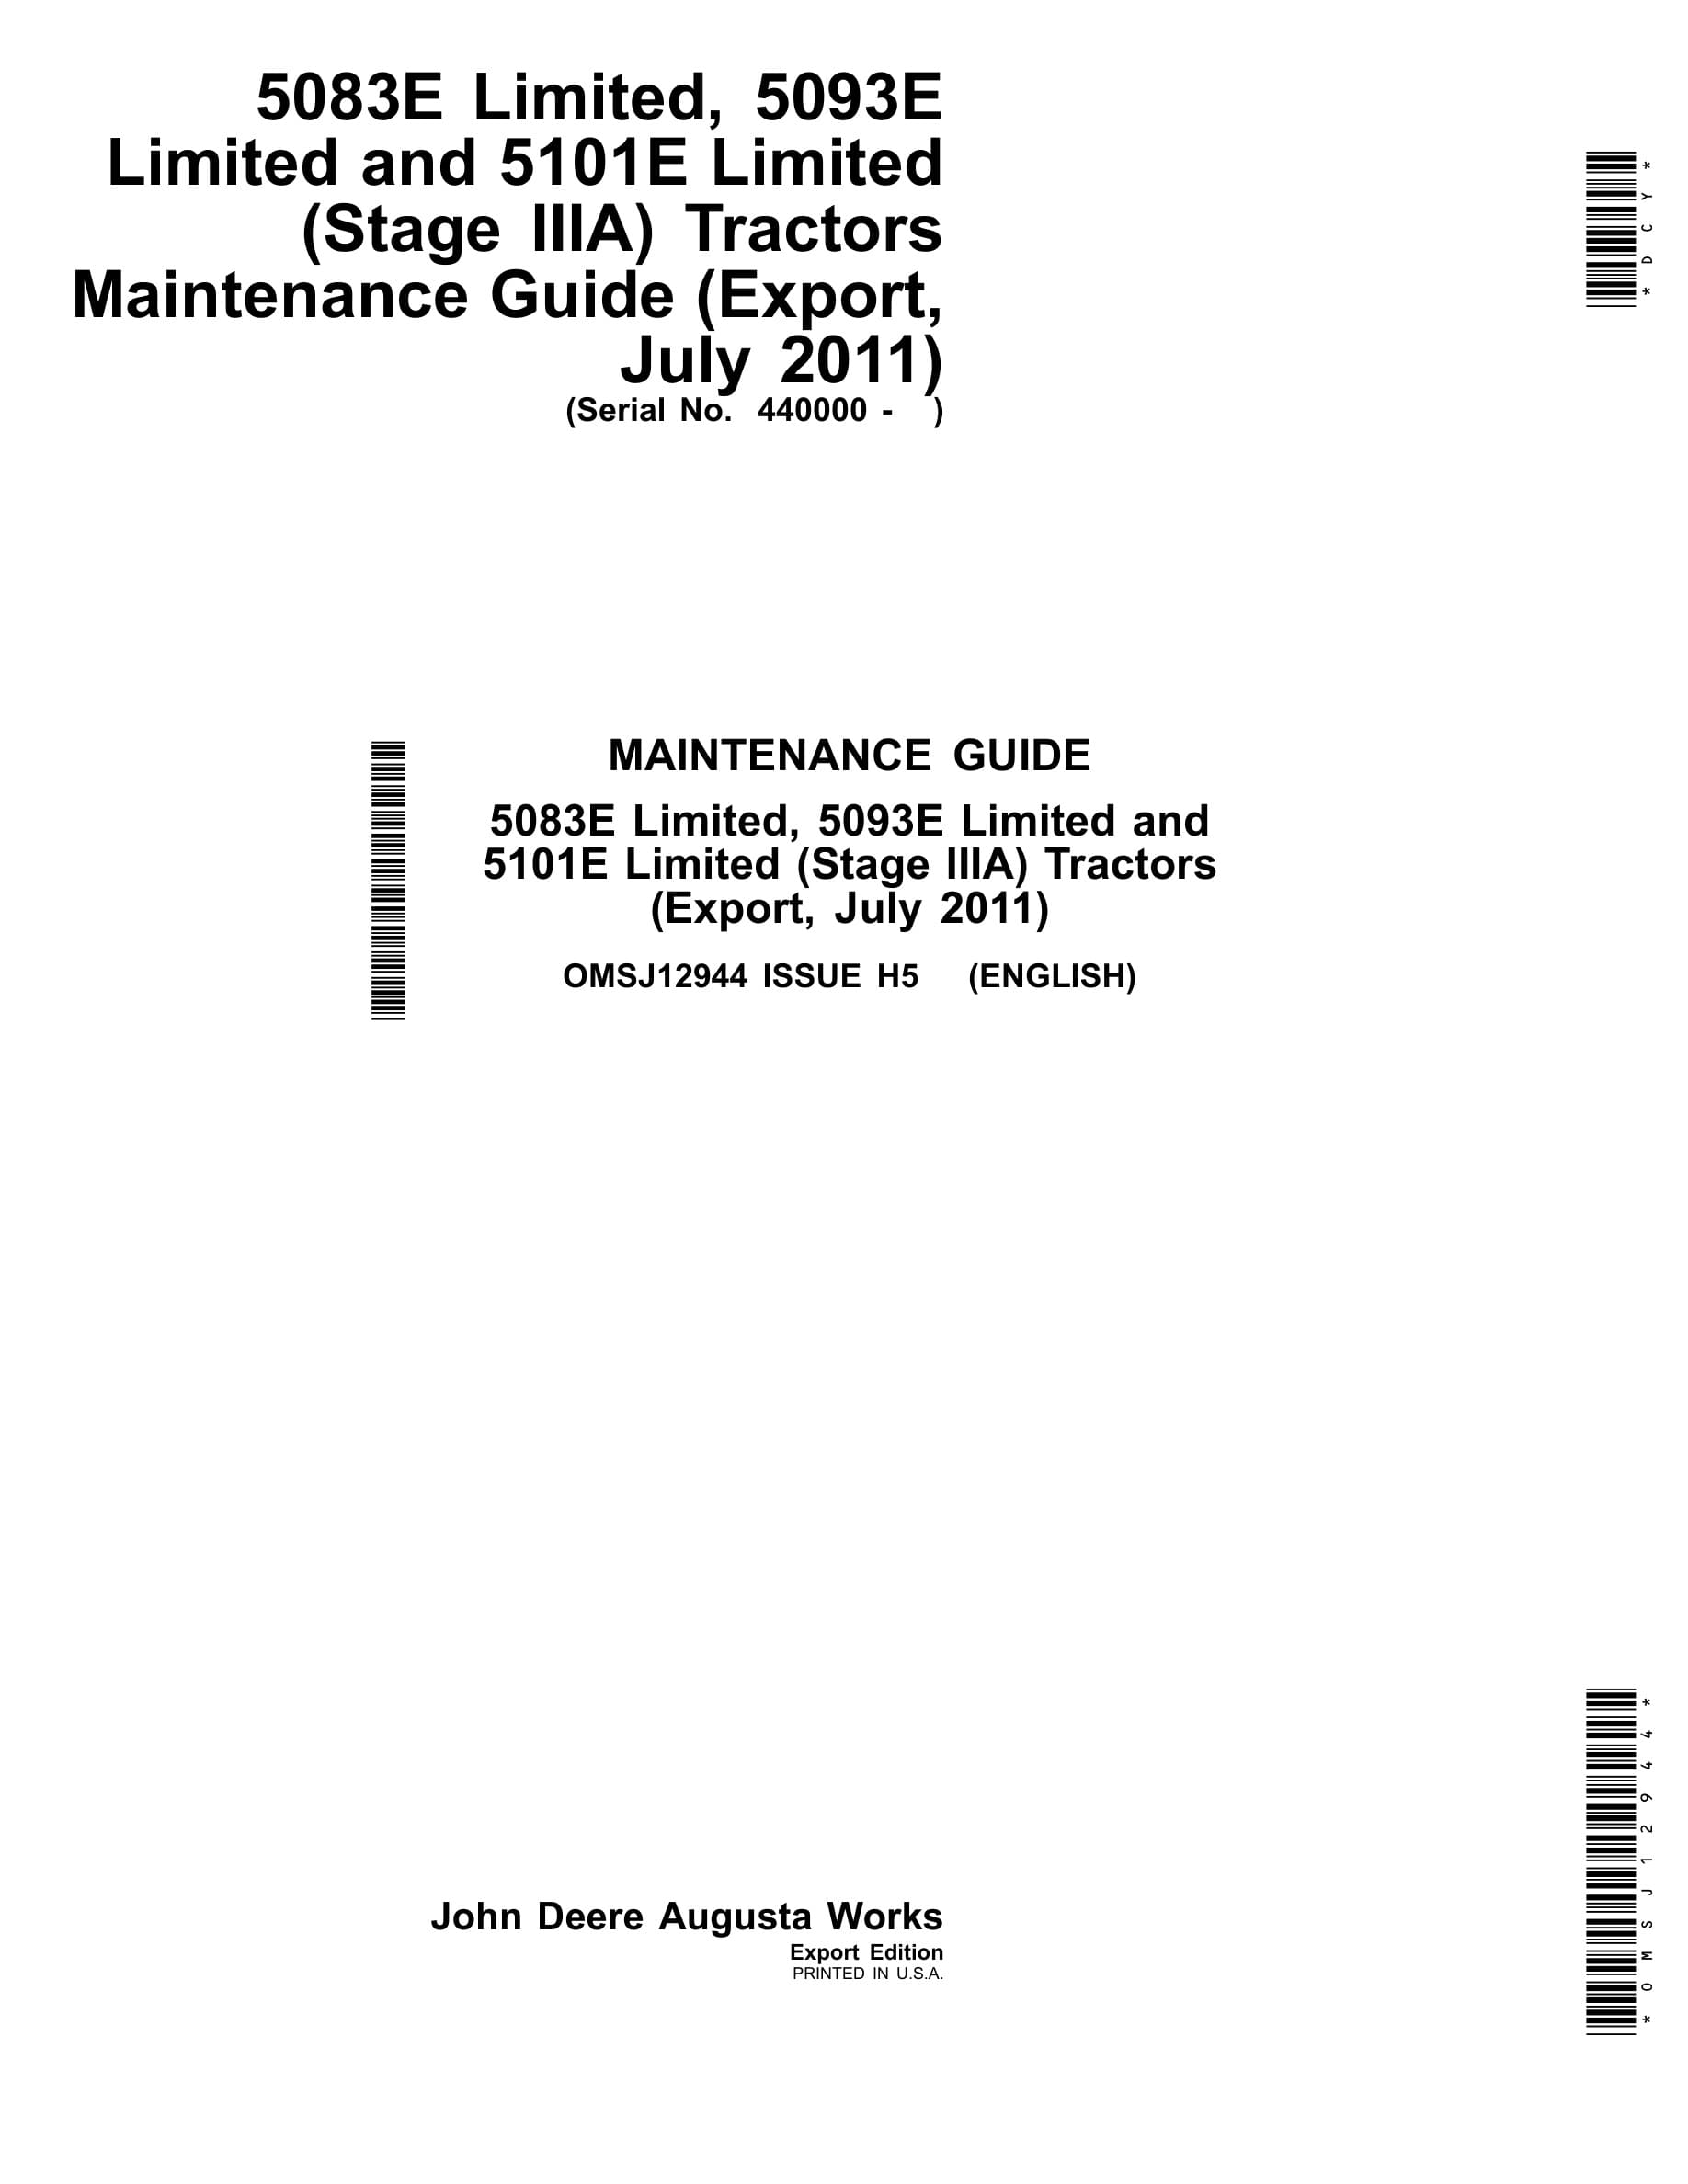 John Deere 5083e Limited, 5093e Limited And 5101e Limited (stage Iiia) Tractors Operator Manuals OMSJ12944-1